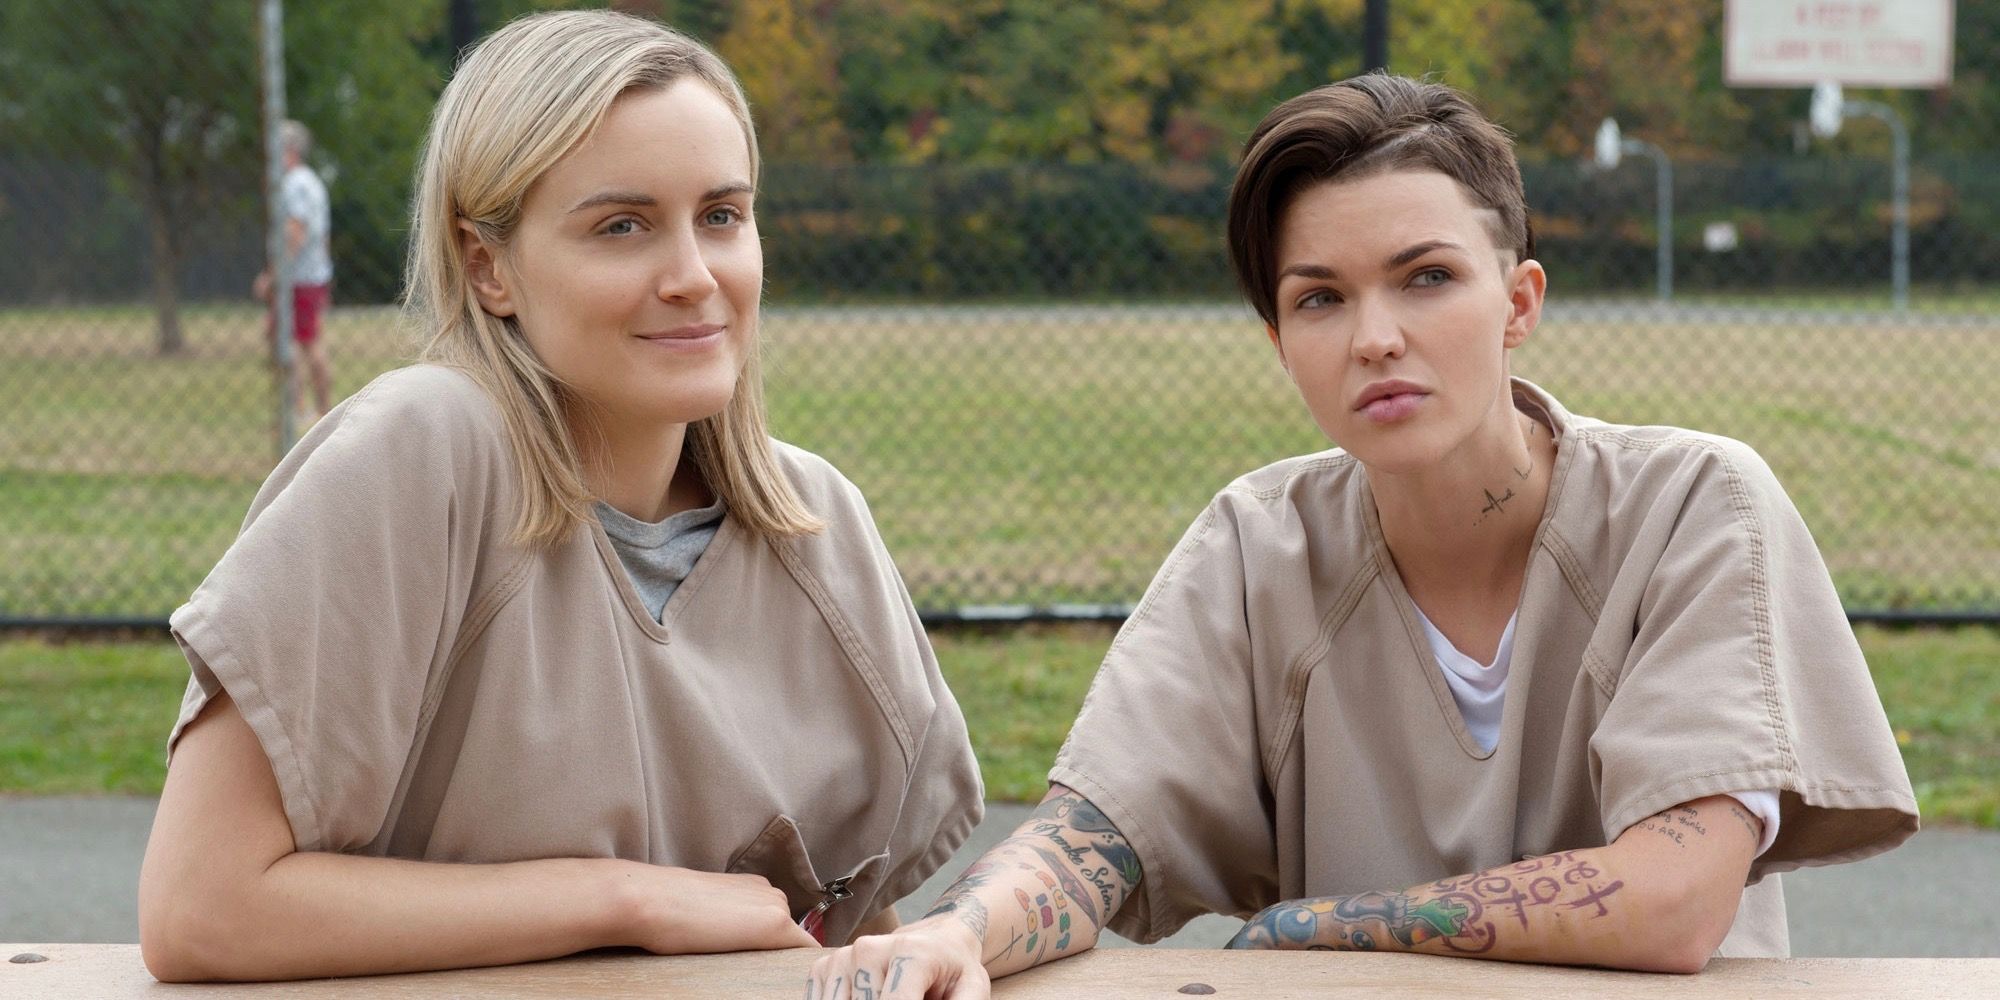 Piper and Stella in Orange is the New Black